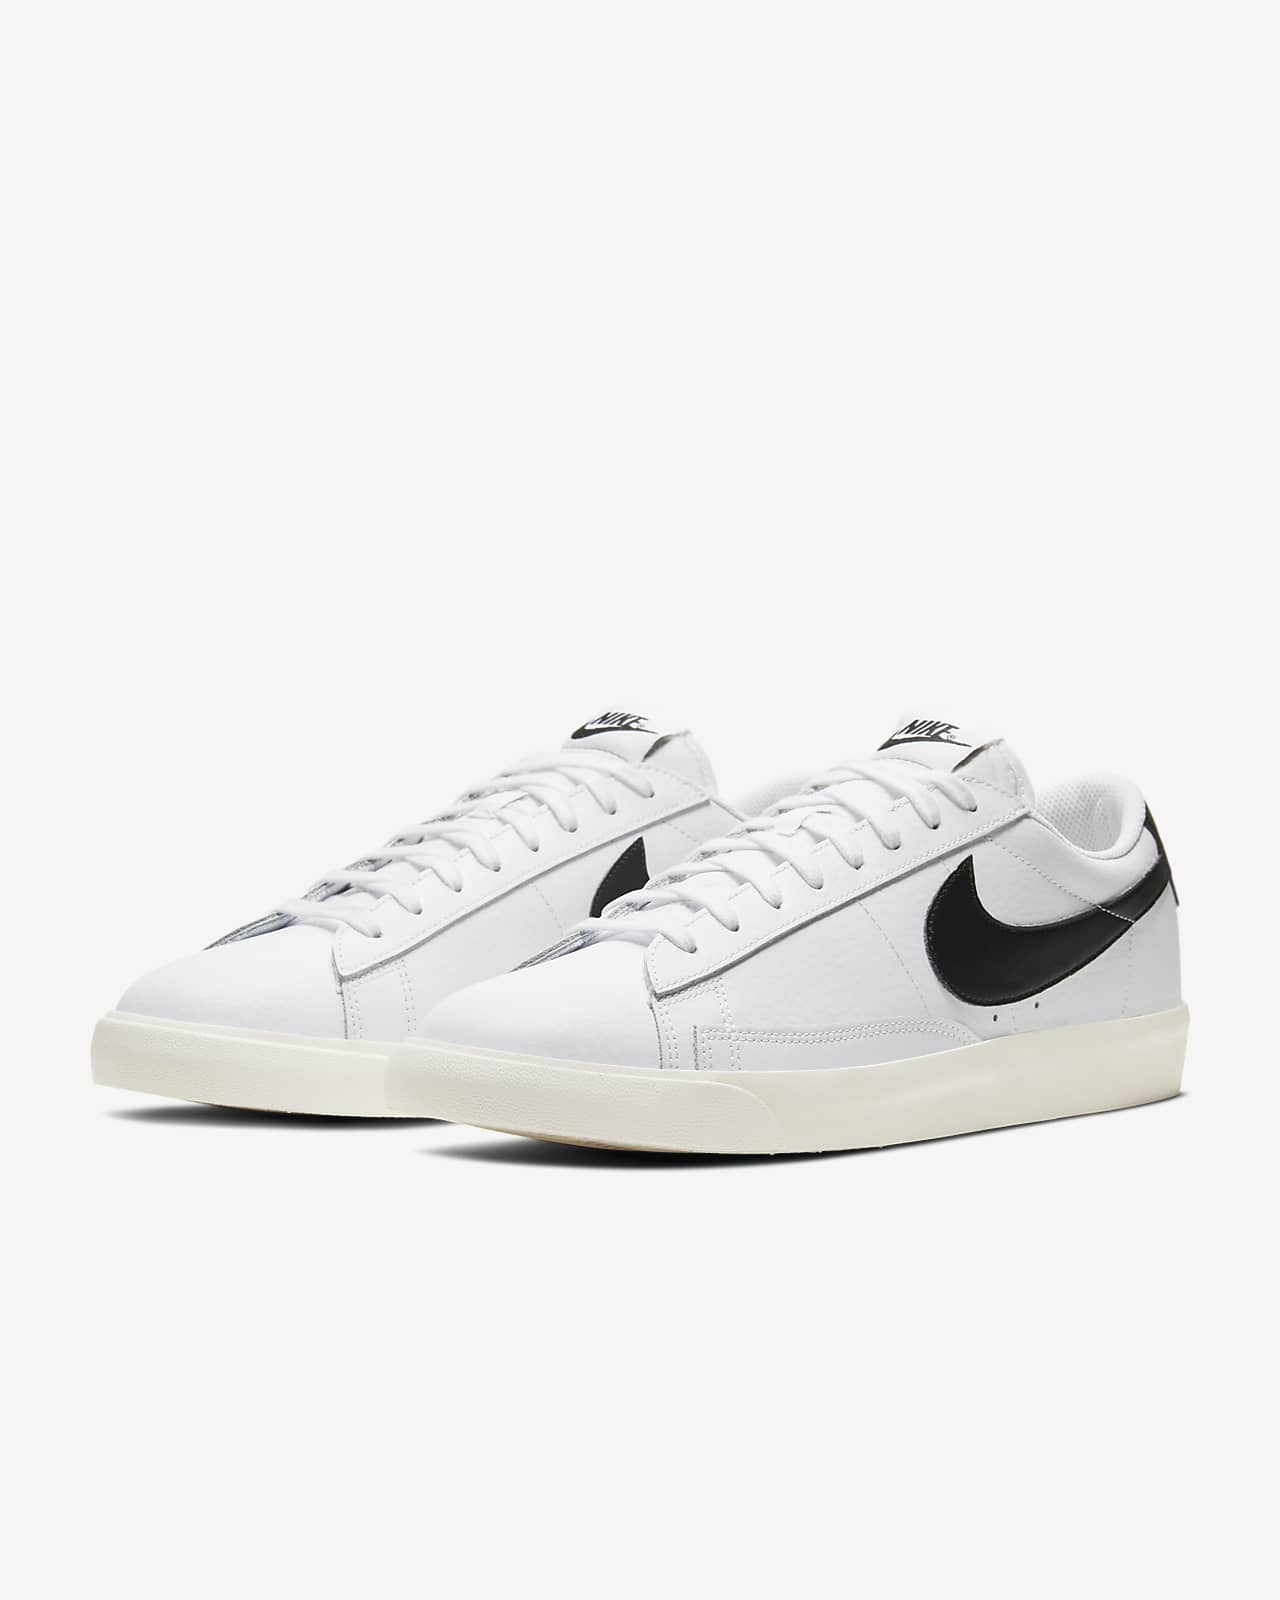 nike white leather shoes mens